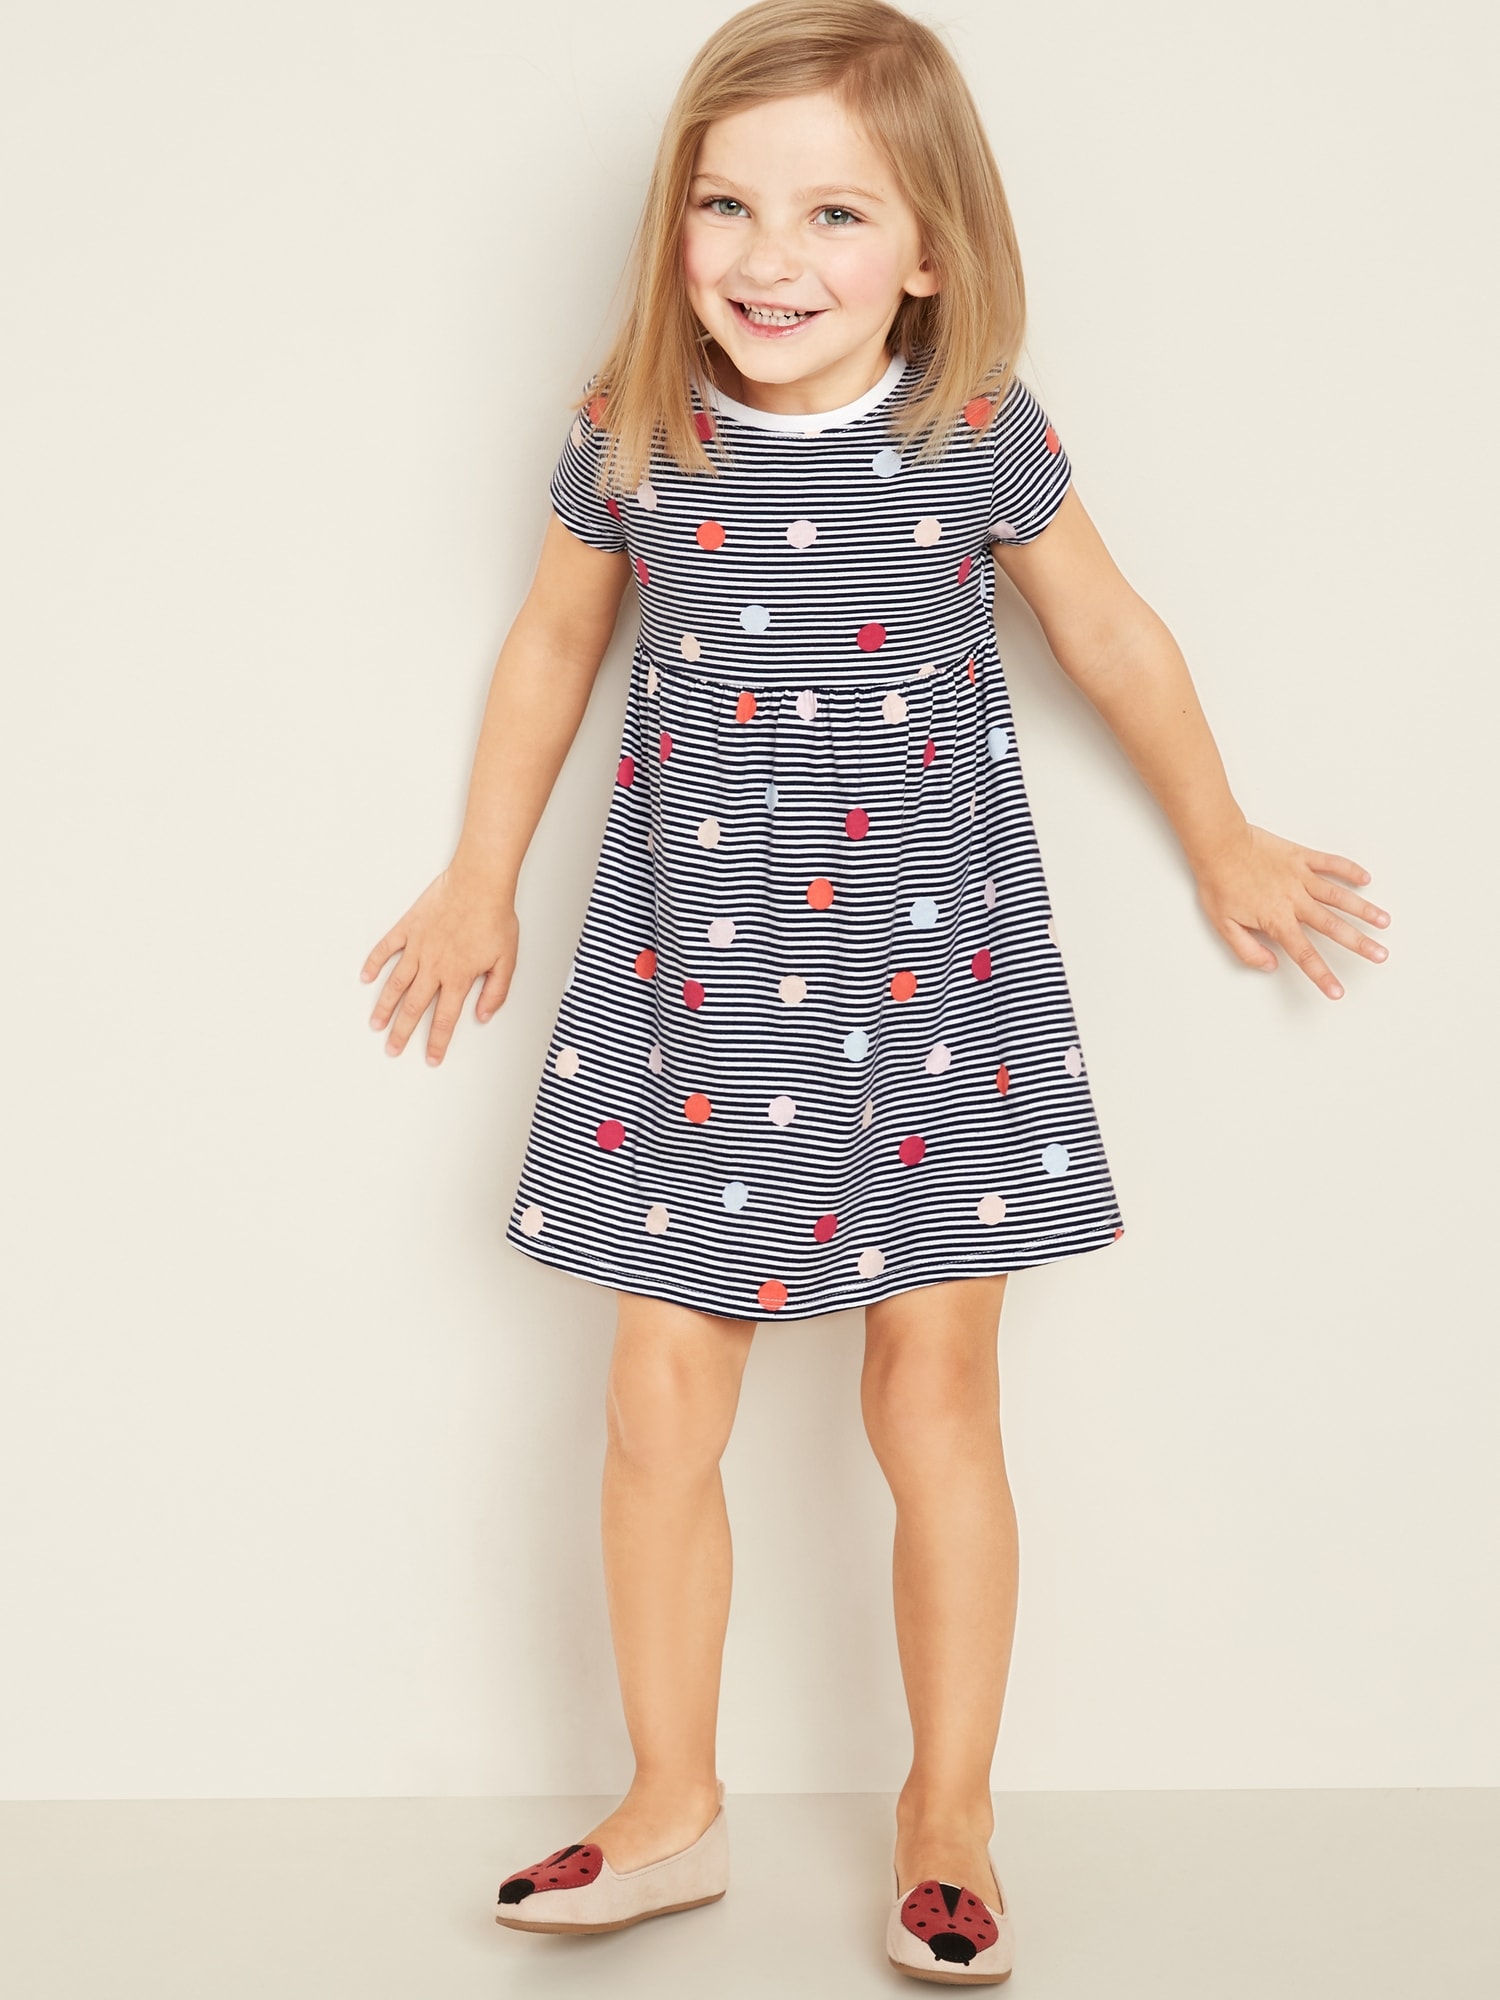 Printed Fit & Flare Dress for Toddler Girls | Old Navy